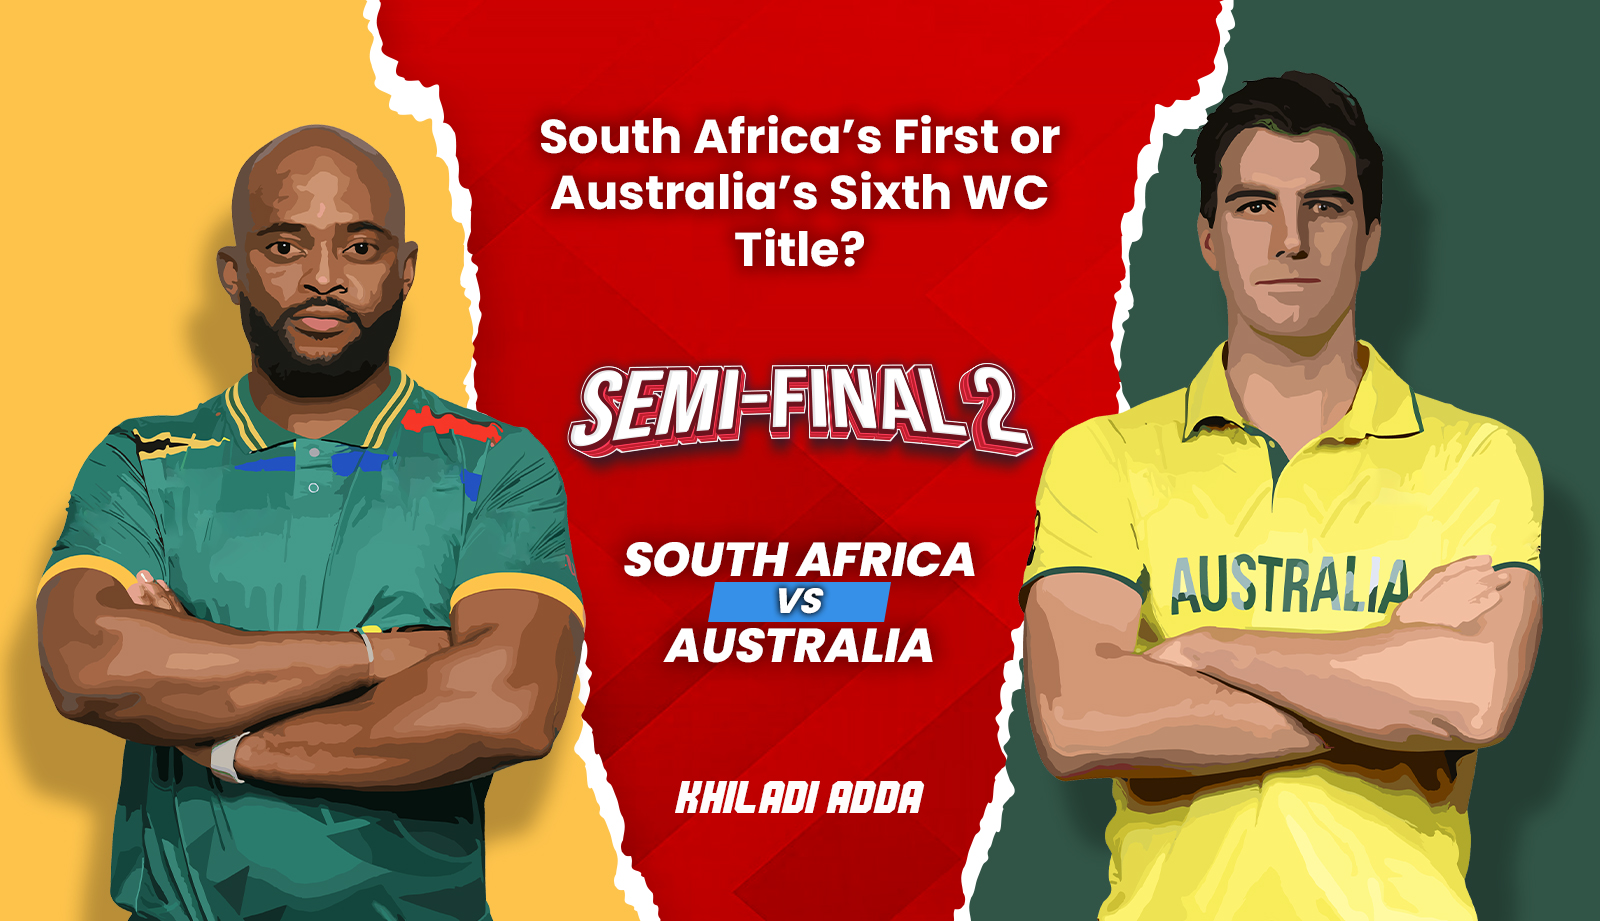 South Africa’s First or Australia’s Sixth WC Title?